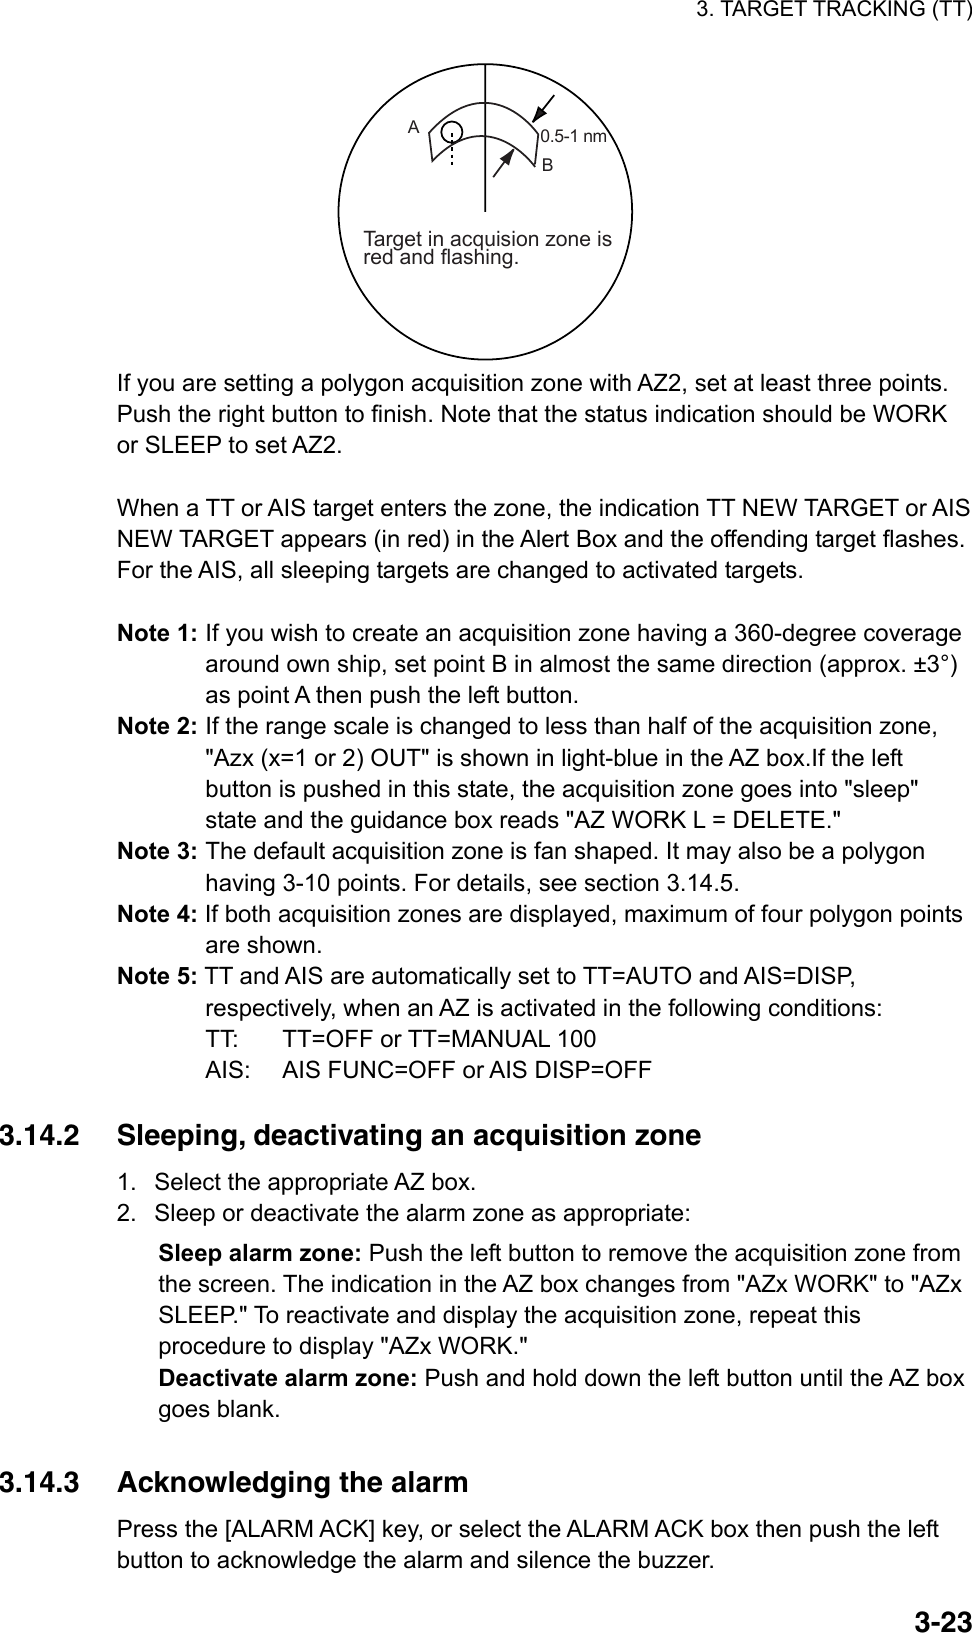 3. TARGET TRACKING (TT)  3-230.5-1 nm Target in acquision zone isred and flashing.AB If you are setting a polygon acquisition zone with AZ2, set at least three points. Push the right button to finish. Note that the status indication should be WORK or SLEEP to set AZ2.    When a TT or AIS target enters the zone, the indication TT NEW TARGET or AIS NEW TARGET appears (in red) in the Alert Box and the offending target flashes. For the AIS, all sleeping targets are changed to activated targets.    Note 1: If you wish to create an acquisition zone having a 360-degree coverage around own ship, set point B in almost the same direction (approx. ±3°) as point A then push the left button. Note 2: If the range scale is changed to less than half of the acquisition zone, &quot;Azx (x=1 or 2) OUT&quot; is shown in light-blue in the AZ box.If the left button is pushed in this state, the acquisition zone goes into &quot;sleep&quot; state and the guidance box reads &quot;AZ WORK L = DELETE.&quot; Note 3: The default acquisition zone is fan shaped. It may also be a polygon having 3-10 points. For details, see section 3.14.5. Note 4: If both acquisition zones are displayed, maximum of four polygon points are shown. Note 5: TT and AIS are automatically set to TT=AUTO and AIS=DISP, respectively, when an AZ is activated in the following conditions: TT:  TT=OFF or TT=MANUAL 100 AIS:  AIS FUNC=OFF or AIS DISP=OFF  3.14.2  Sleeping, deactivating an acquisition zone 1.  Select the appropriate AZ box.   2.  Sleep or deactivate the alarm zone as appropriate: Sleep alarm zone: Push the left button to remove the acquisition zone from the screen. The indication in the AZ box changes from &quot;AZx WORK&quot; to &quot;AZx SLEEP.&quot; To reactivate and display the acquisition zone, repeat this procedure to display &quot;AZx WORK.&quot; Deactivate alarm zone: Push and hold down the left button until the AZ box goes blank.     3.14.3  Acknowledging the alarm Press the [ALARM ACK] key, or select the ALARM ACK box then push the left button to acknowledge the alarm and silence the buzzer. 